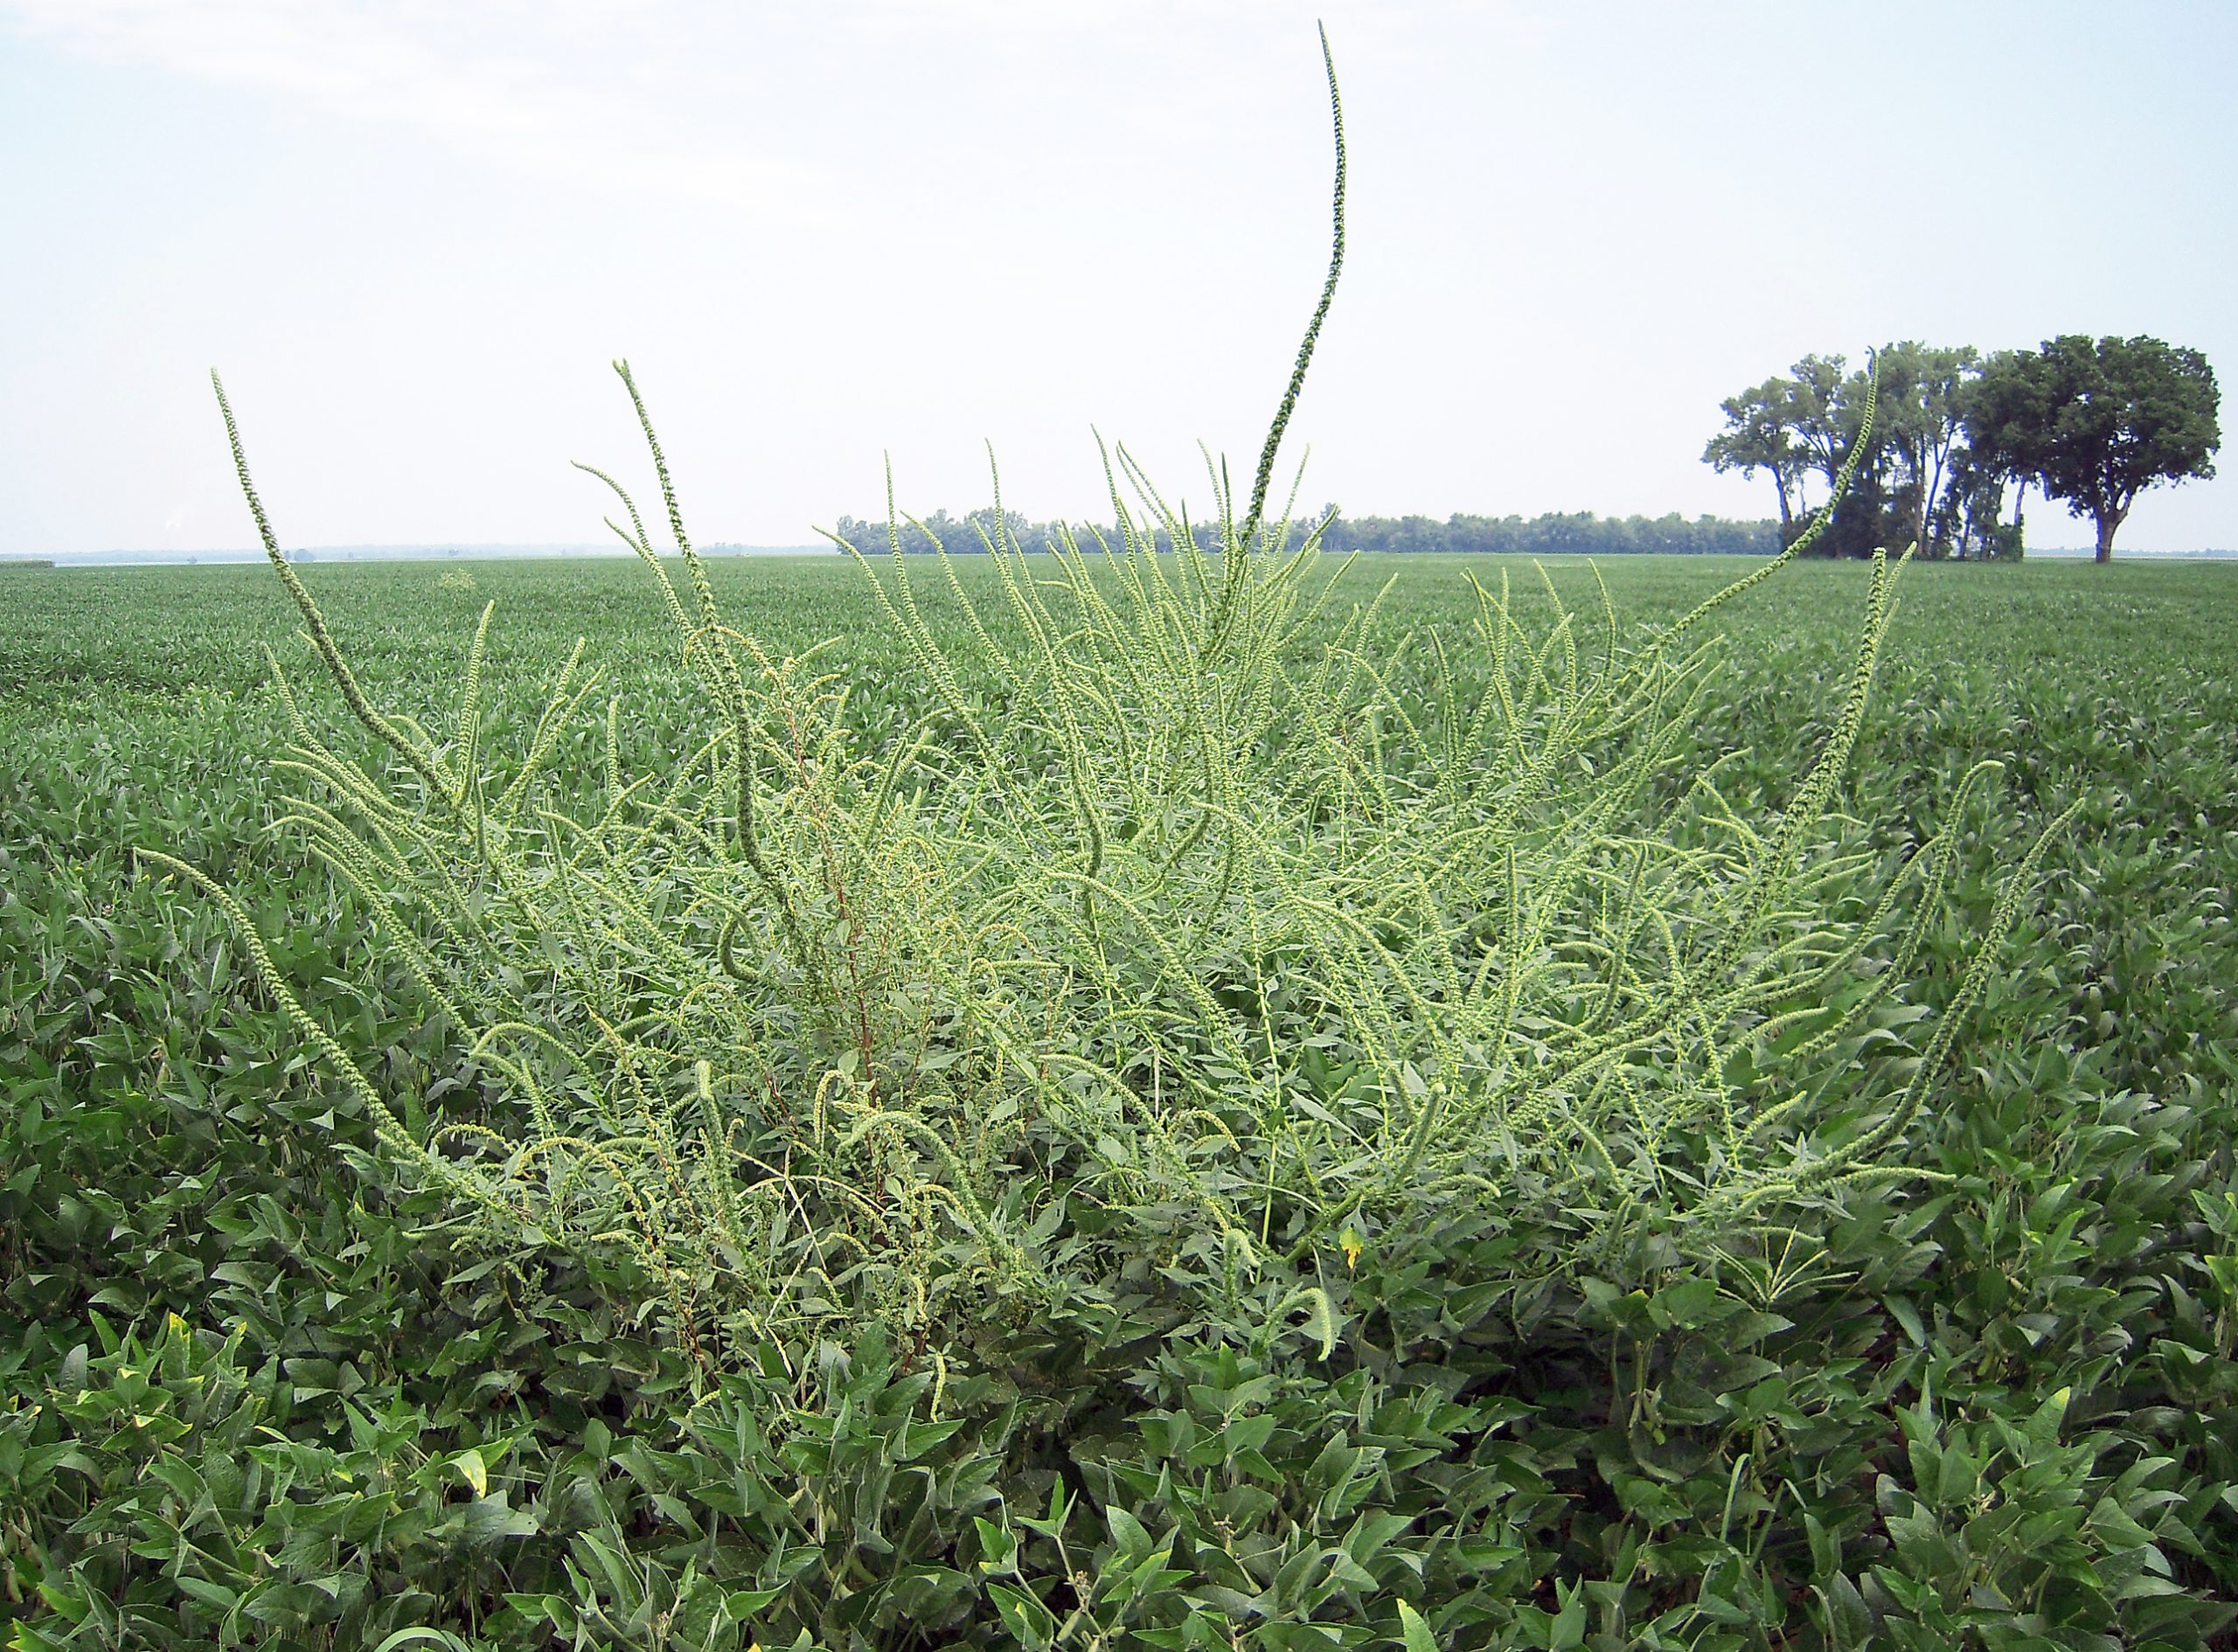 Palmer Amaranth is a problematic annual broadleaf weed that looks very similar to Waterhemp and Redroot Pigweed.